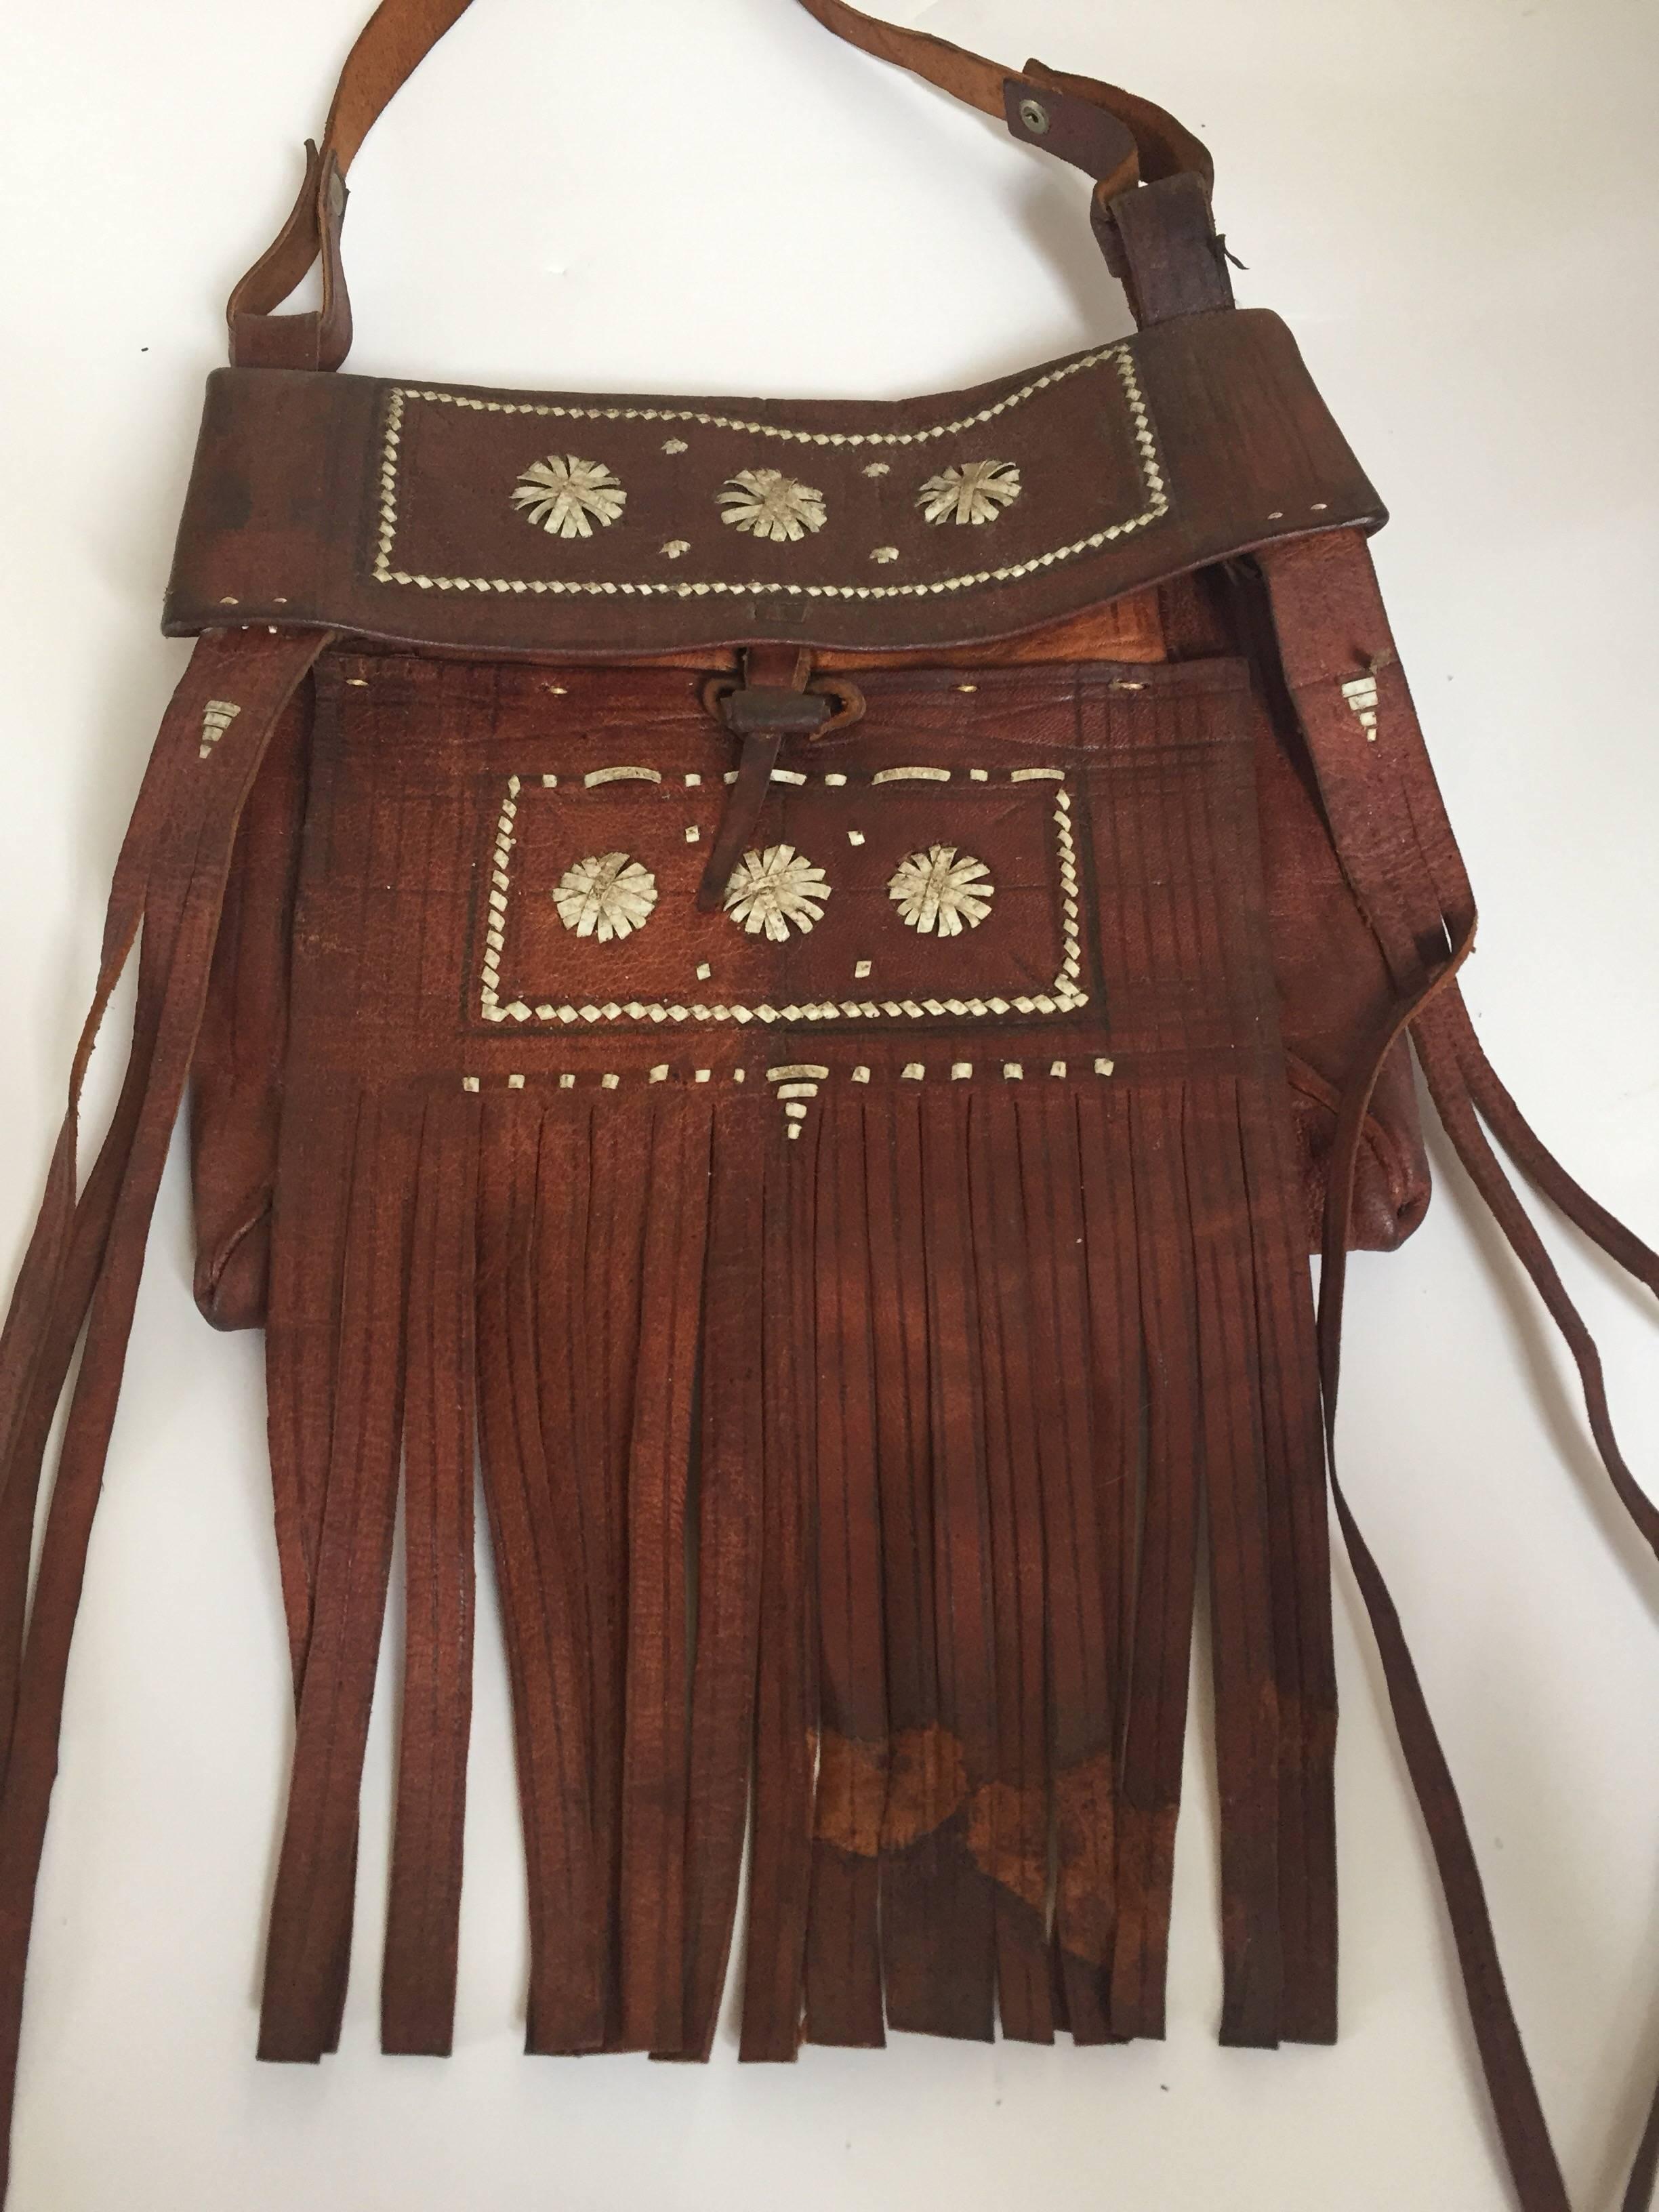 Vintage 1970s African Moroccan leather handcrafted Tuareg bag with fringes.
Authentic Real work of art hand made by the Berber tribes of Morocco.
Tightly woven colorful leather strips make up an intricate geometric tribal African pattern on the